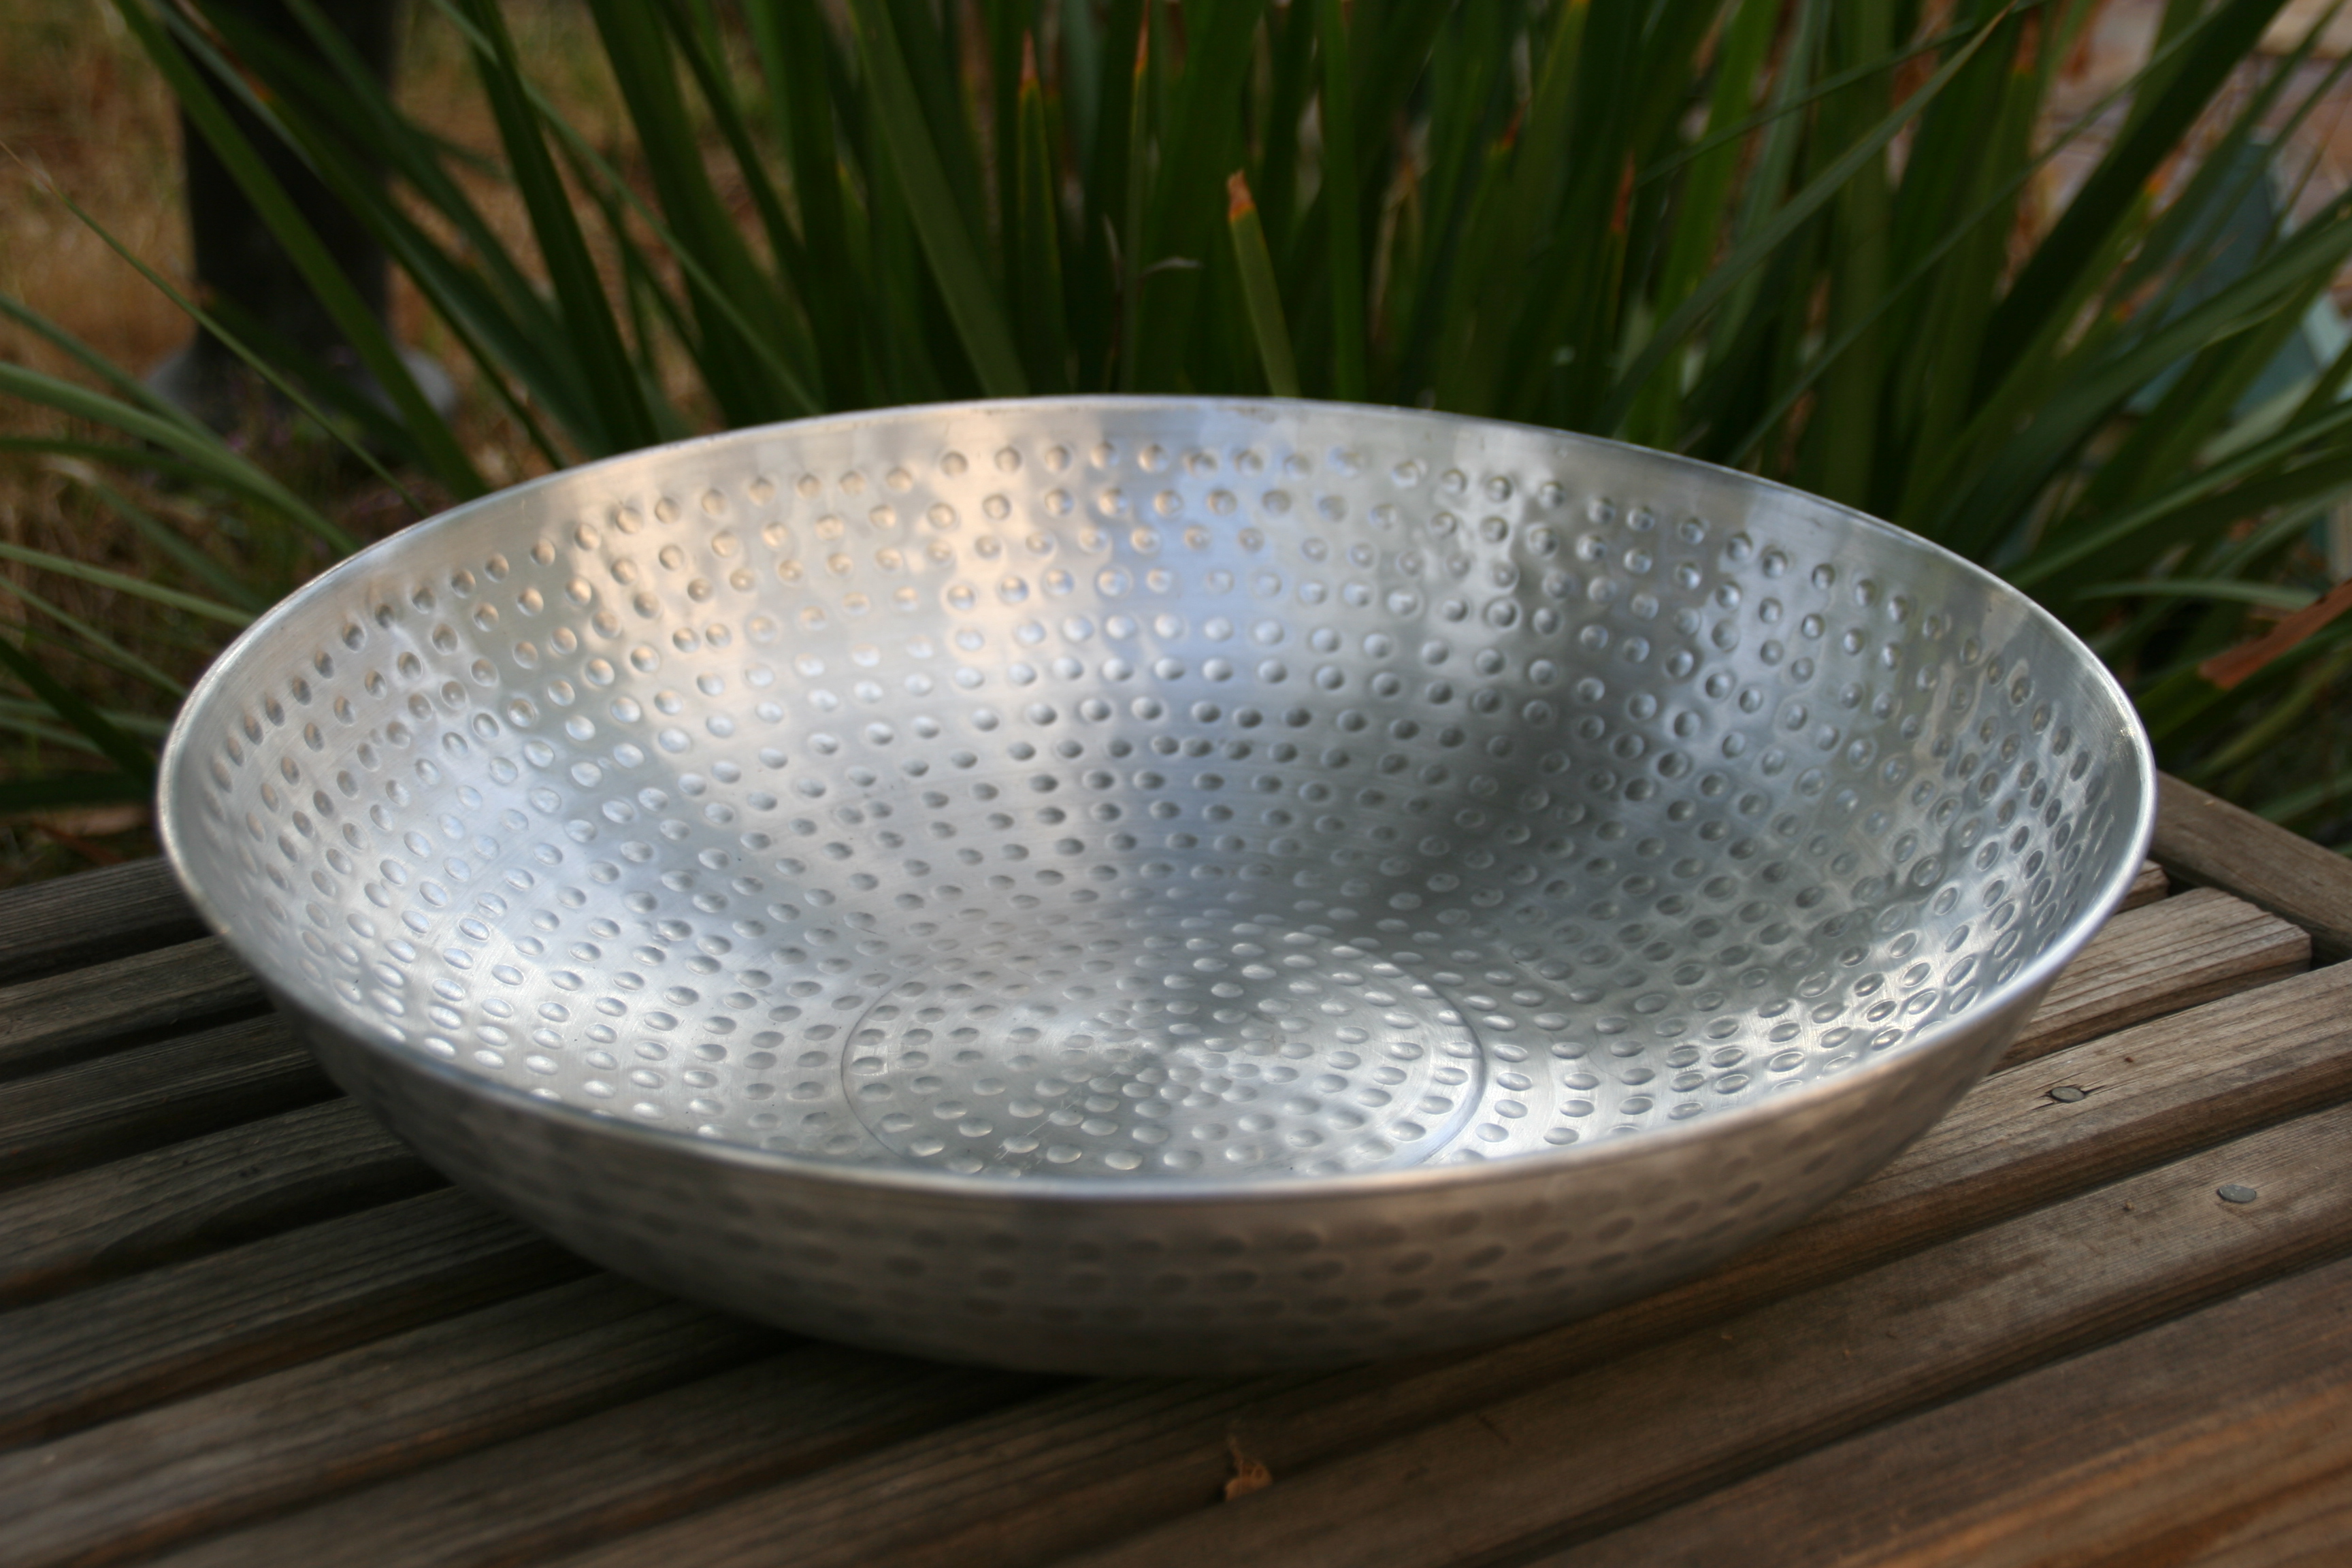 An Aluminum Dish Placed on a Wooden Panel Surface